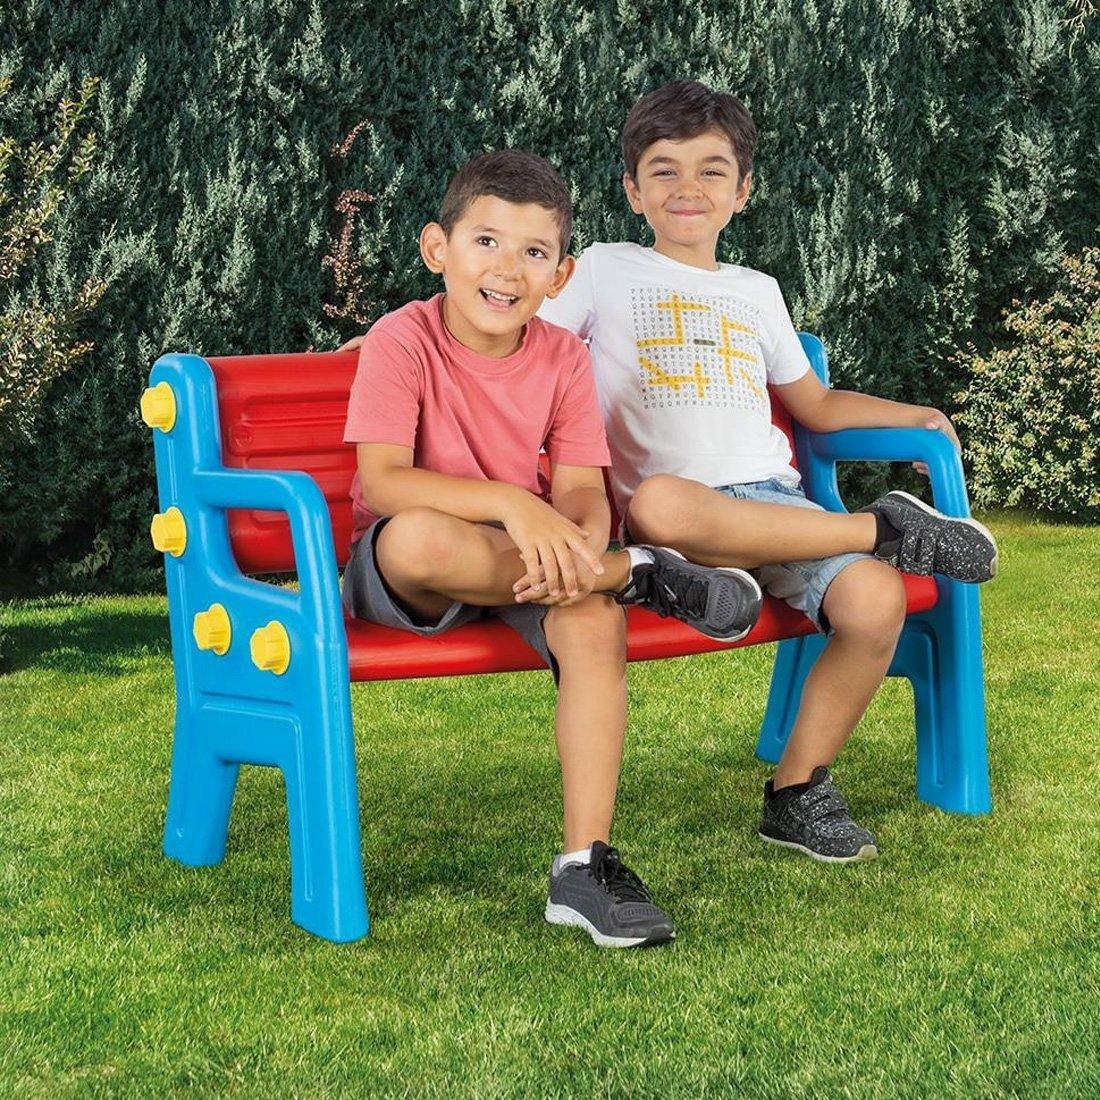 Dolu 7027 In And Outdoor Bench - BumbleToys - 5-7 Years, Boys, Cecil, Girls, Kids Furniture